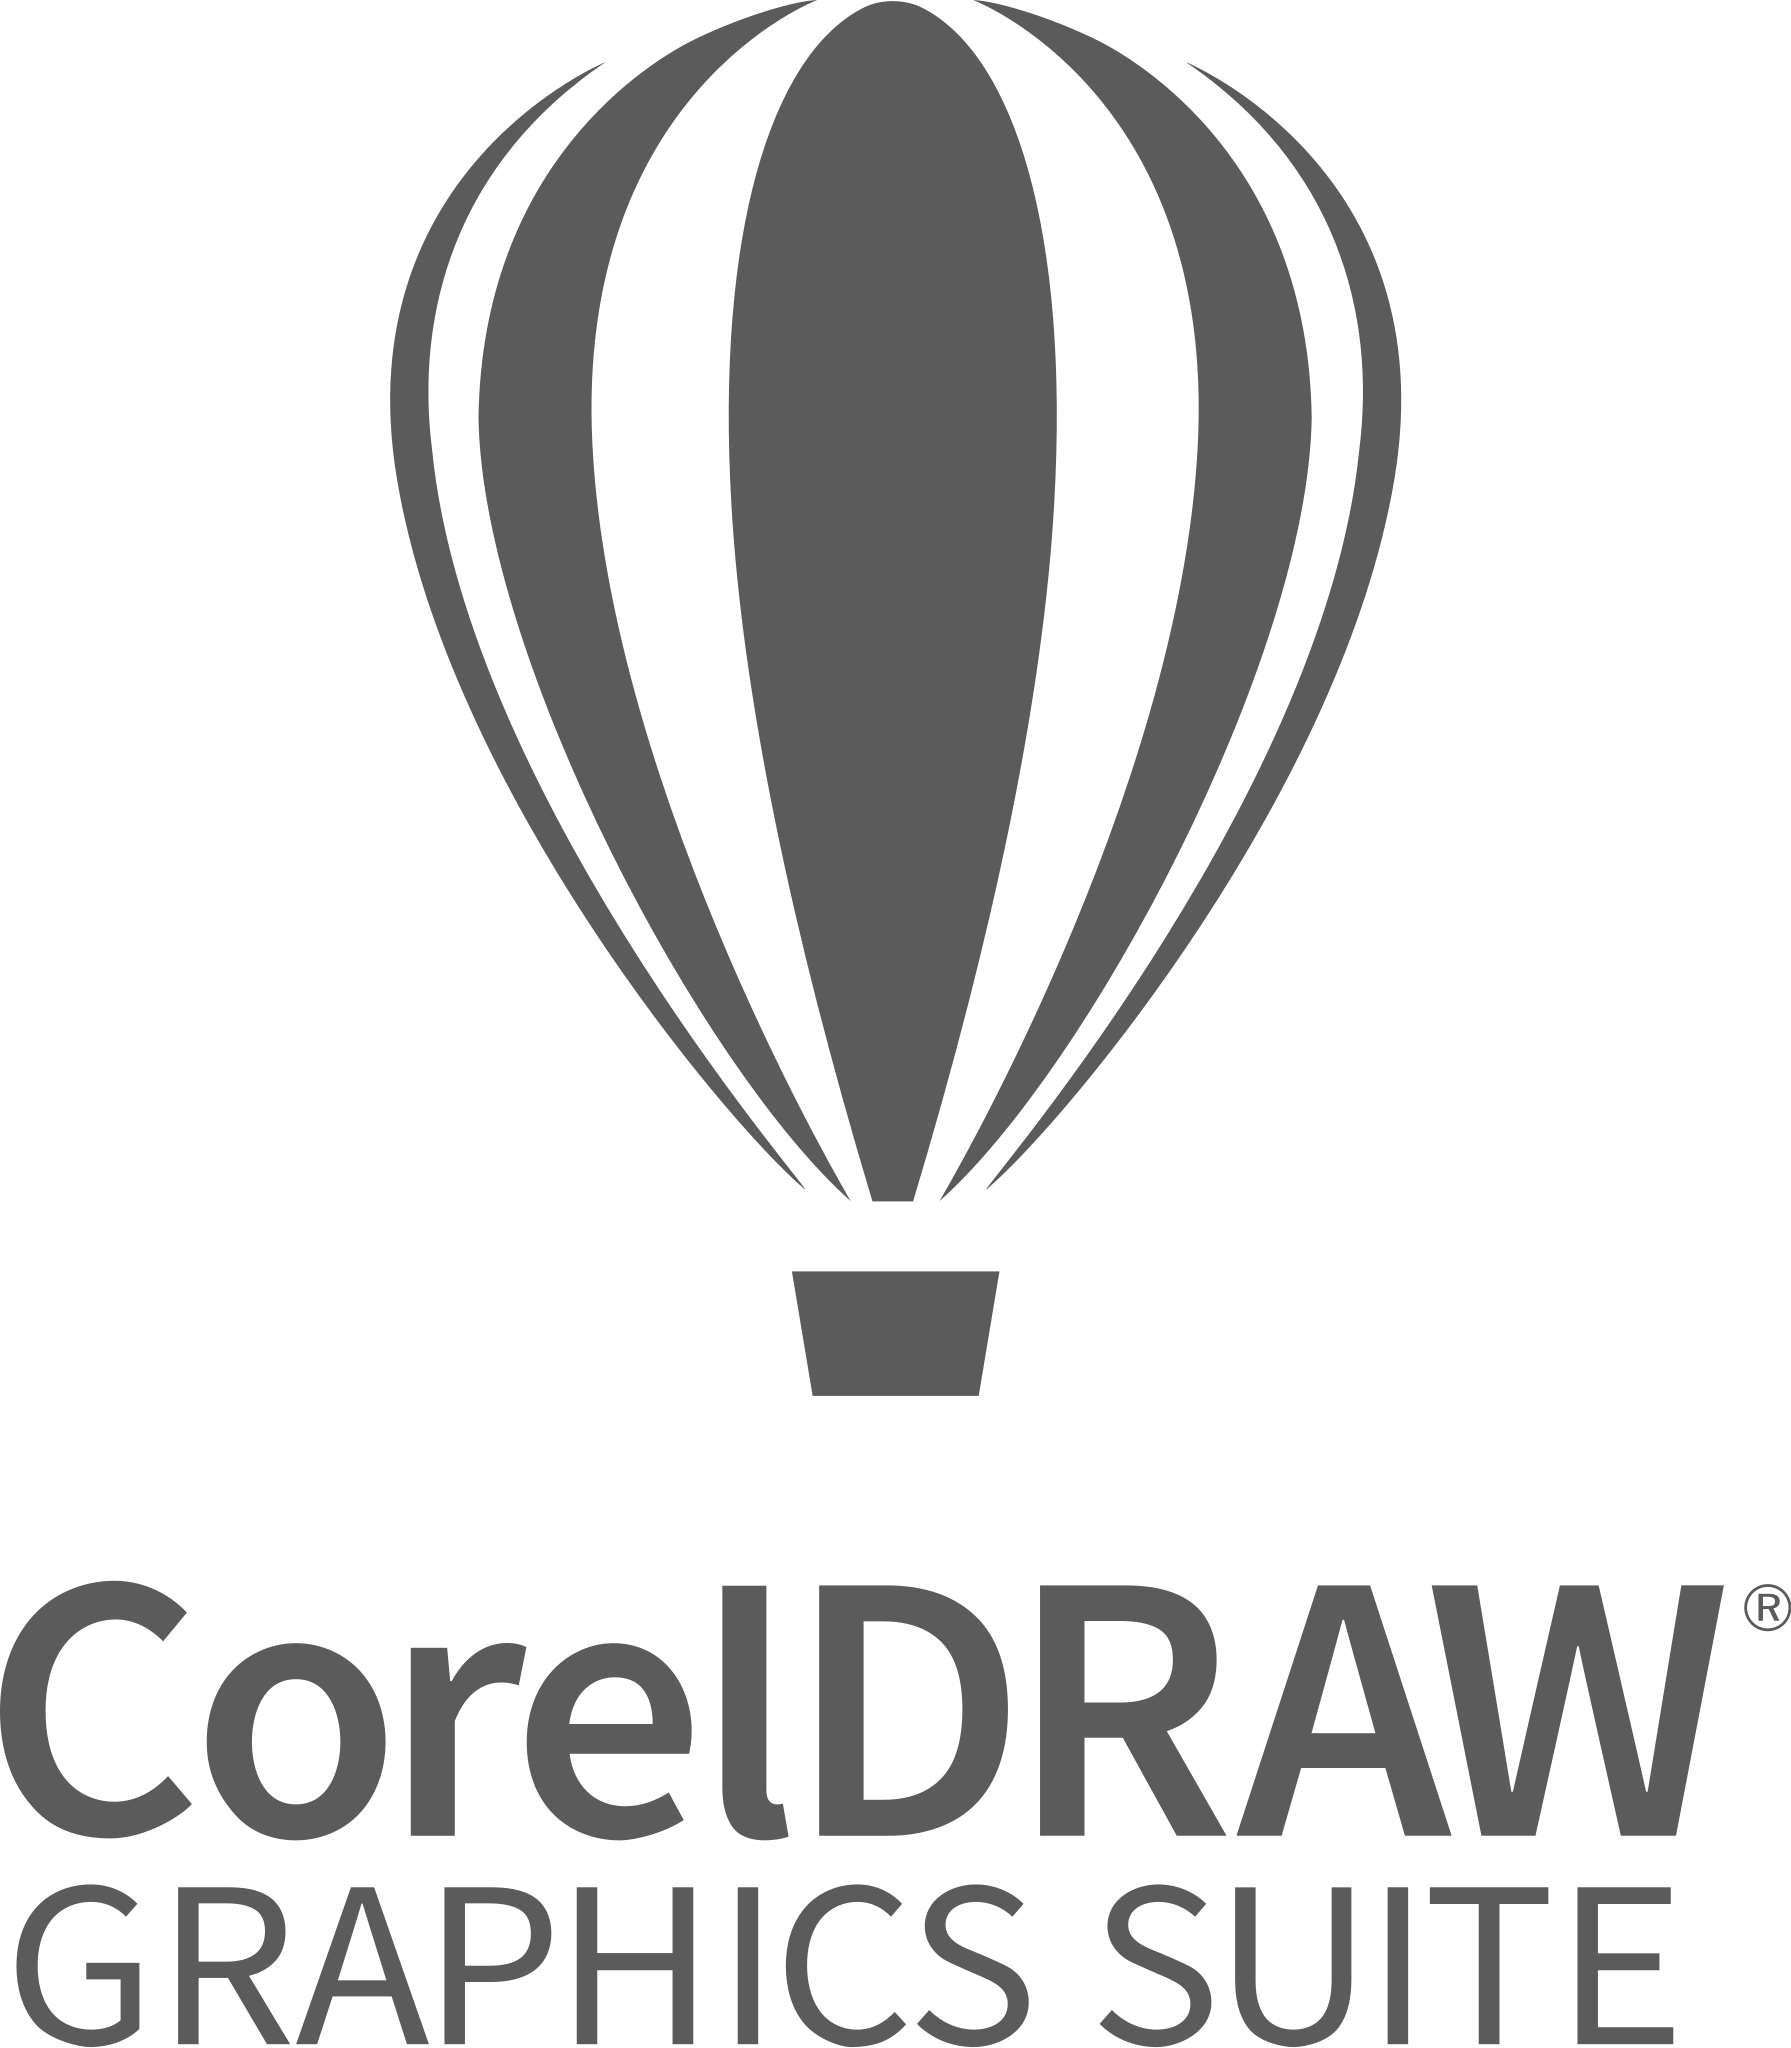 CorelDRAW Graphics Suite 2019 launches for Windows, macOS - Neowin